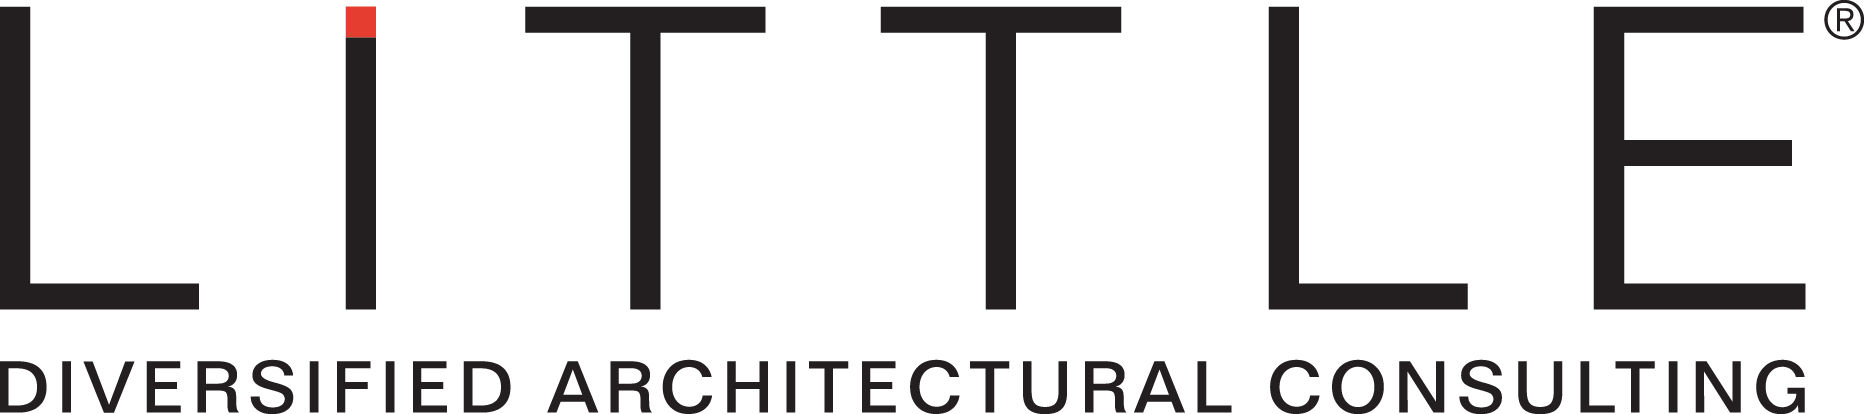 Little Diversified Architectural Consulting logo